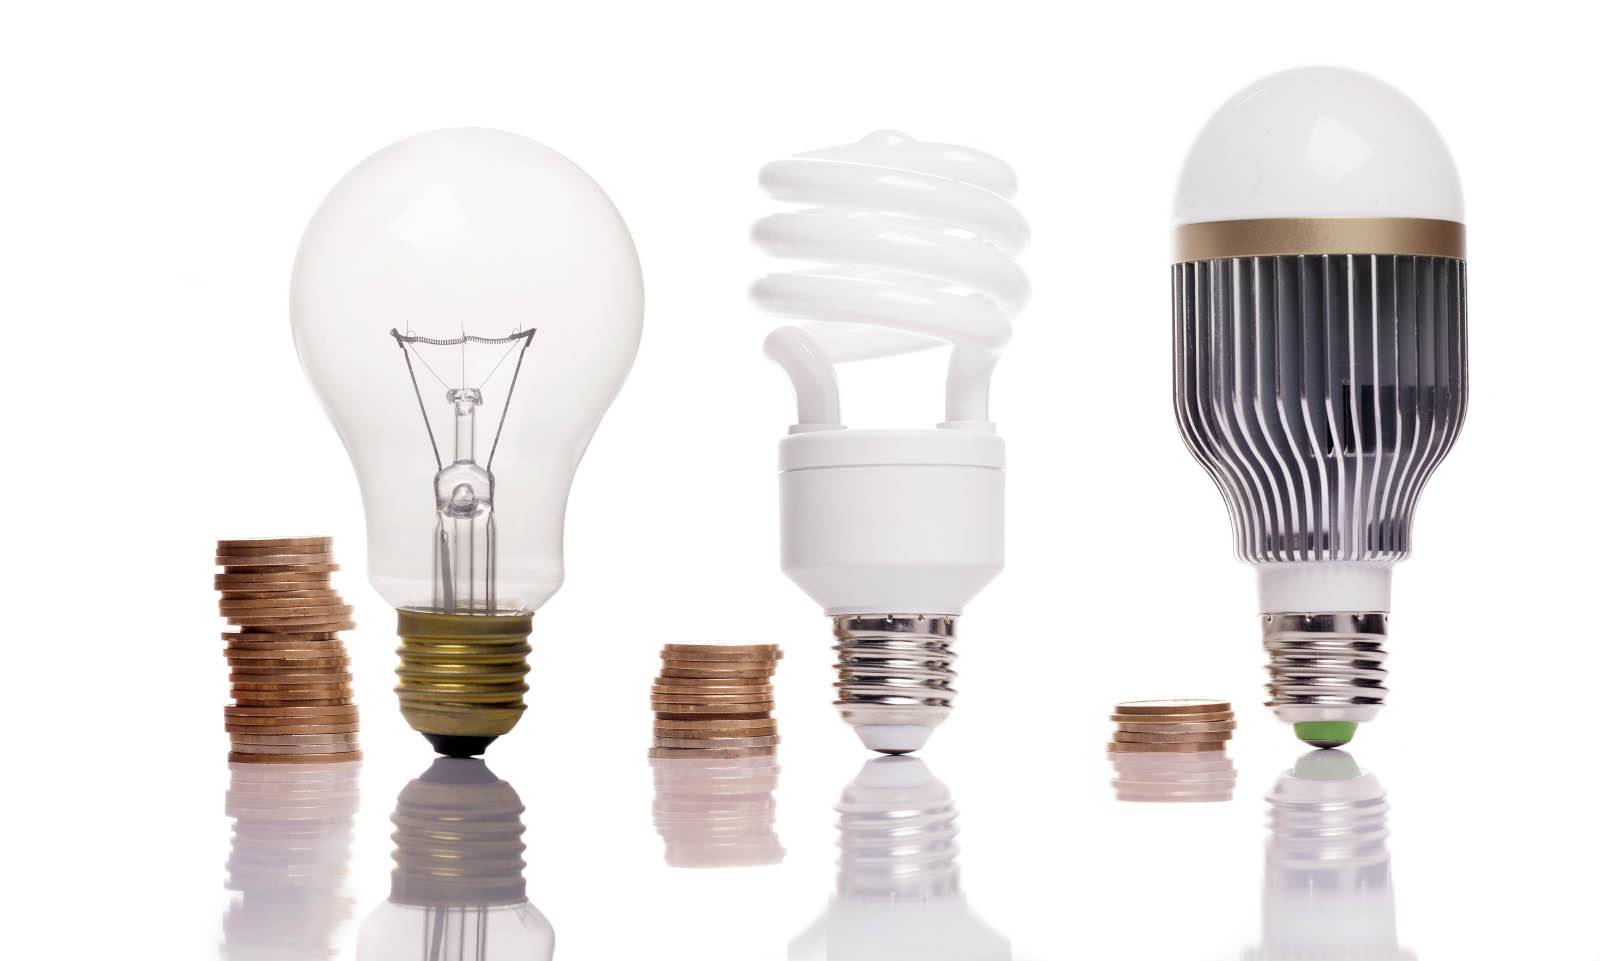 incandescent, CFL and LED light bulbs